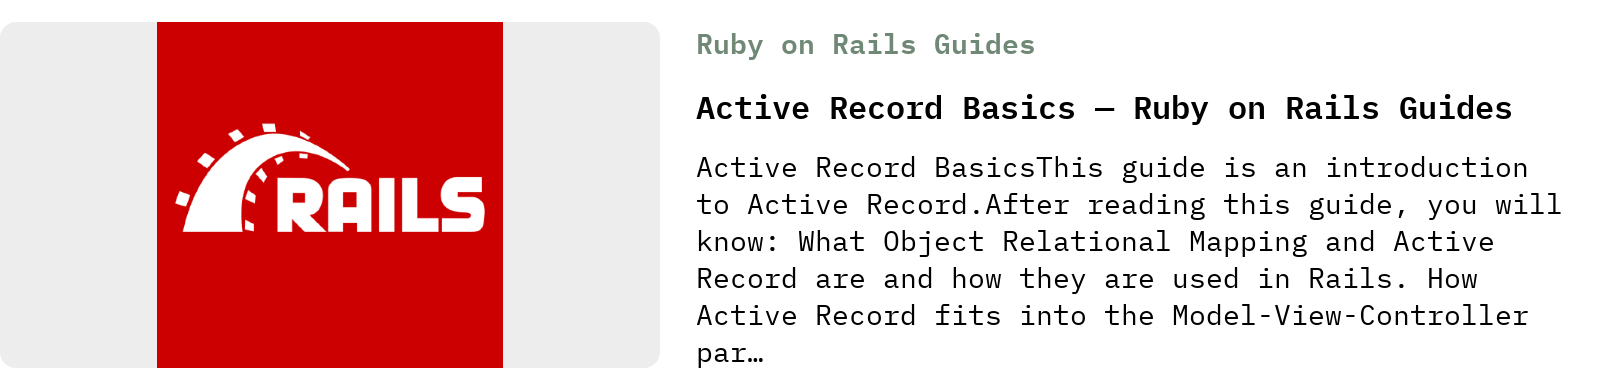 From Ruby on Rails Guides: Active Record Basics — Ruby on Rails Guides | Active Record BasicsThis guide is an introduction to Active Record.After reading this guide, you will know: What Object Relational Mapping and Active Record are and how they are used in Rails. How Active Record fits into the Model-View-Controller par…